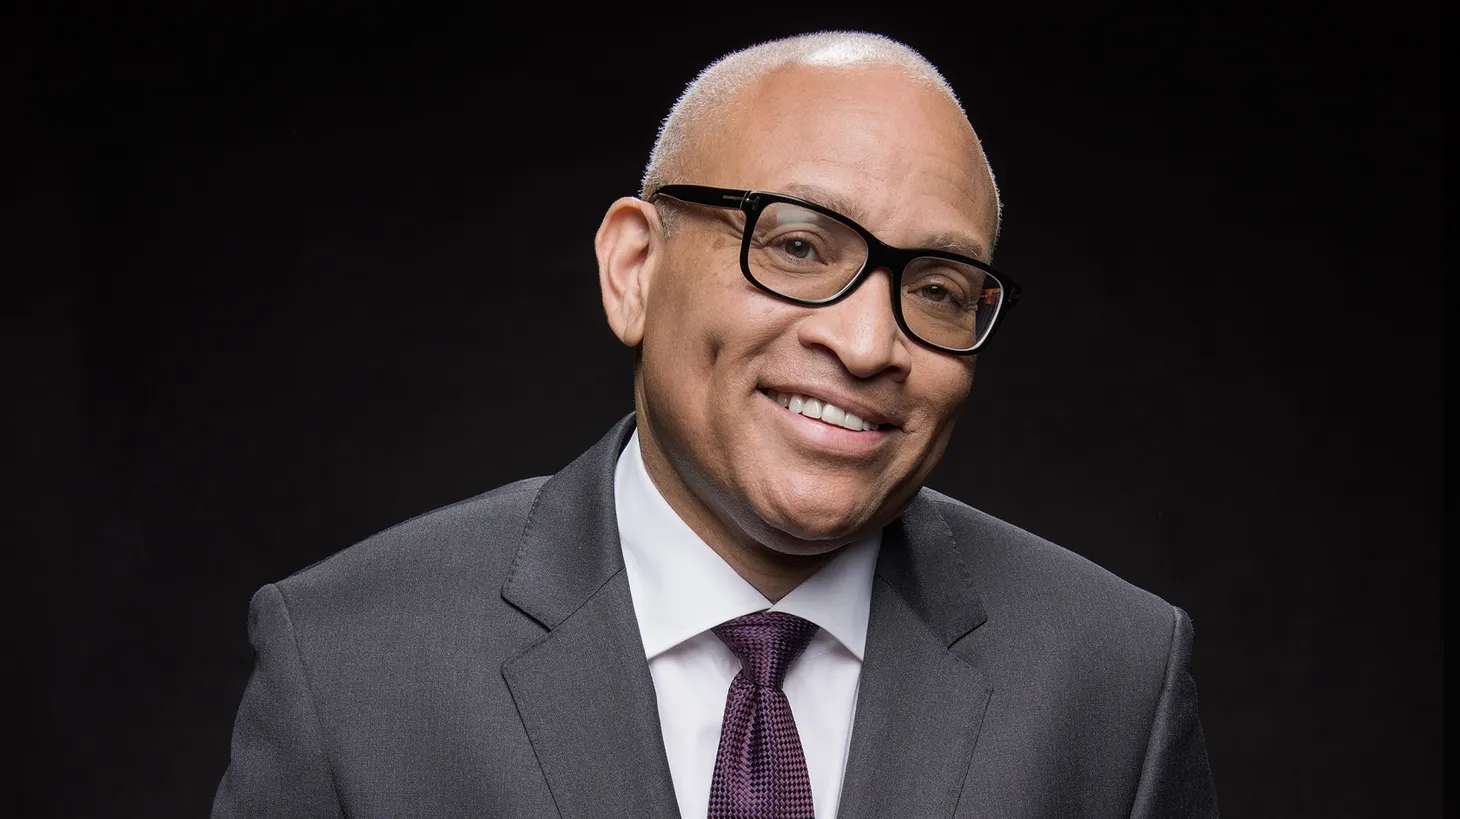 “As a comedian, you're thinking of ways you're gonna sometimes [say] things [that] are shocking,” says Larry Wilmore. “I don't need agreement to do the thing that I want to do. I'm not really seeking agreement.”